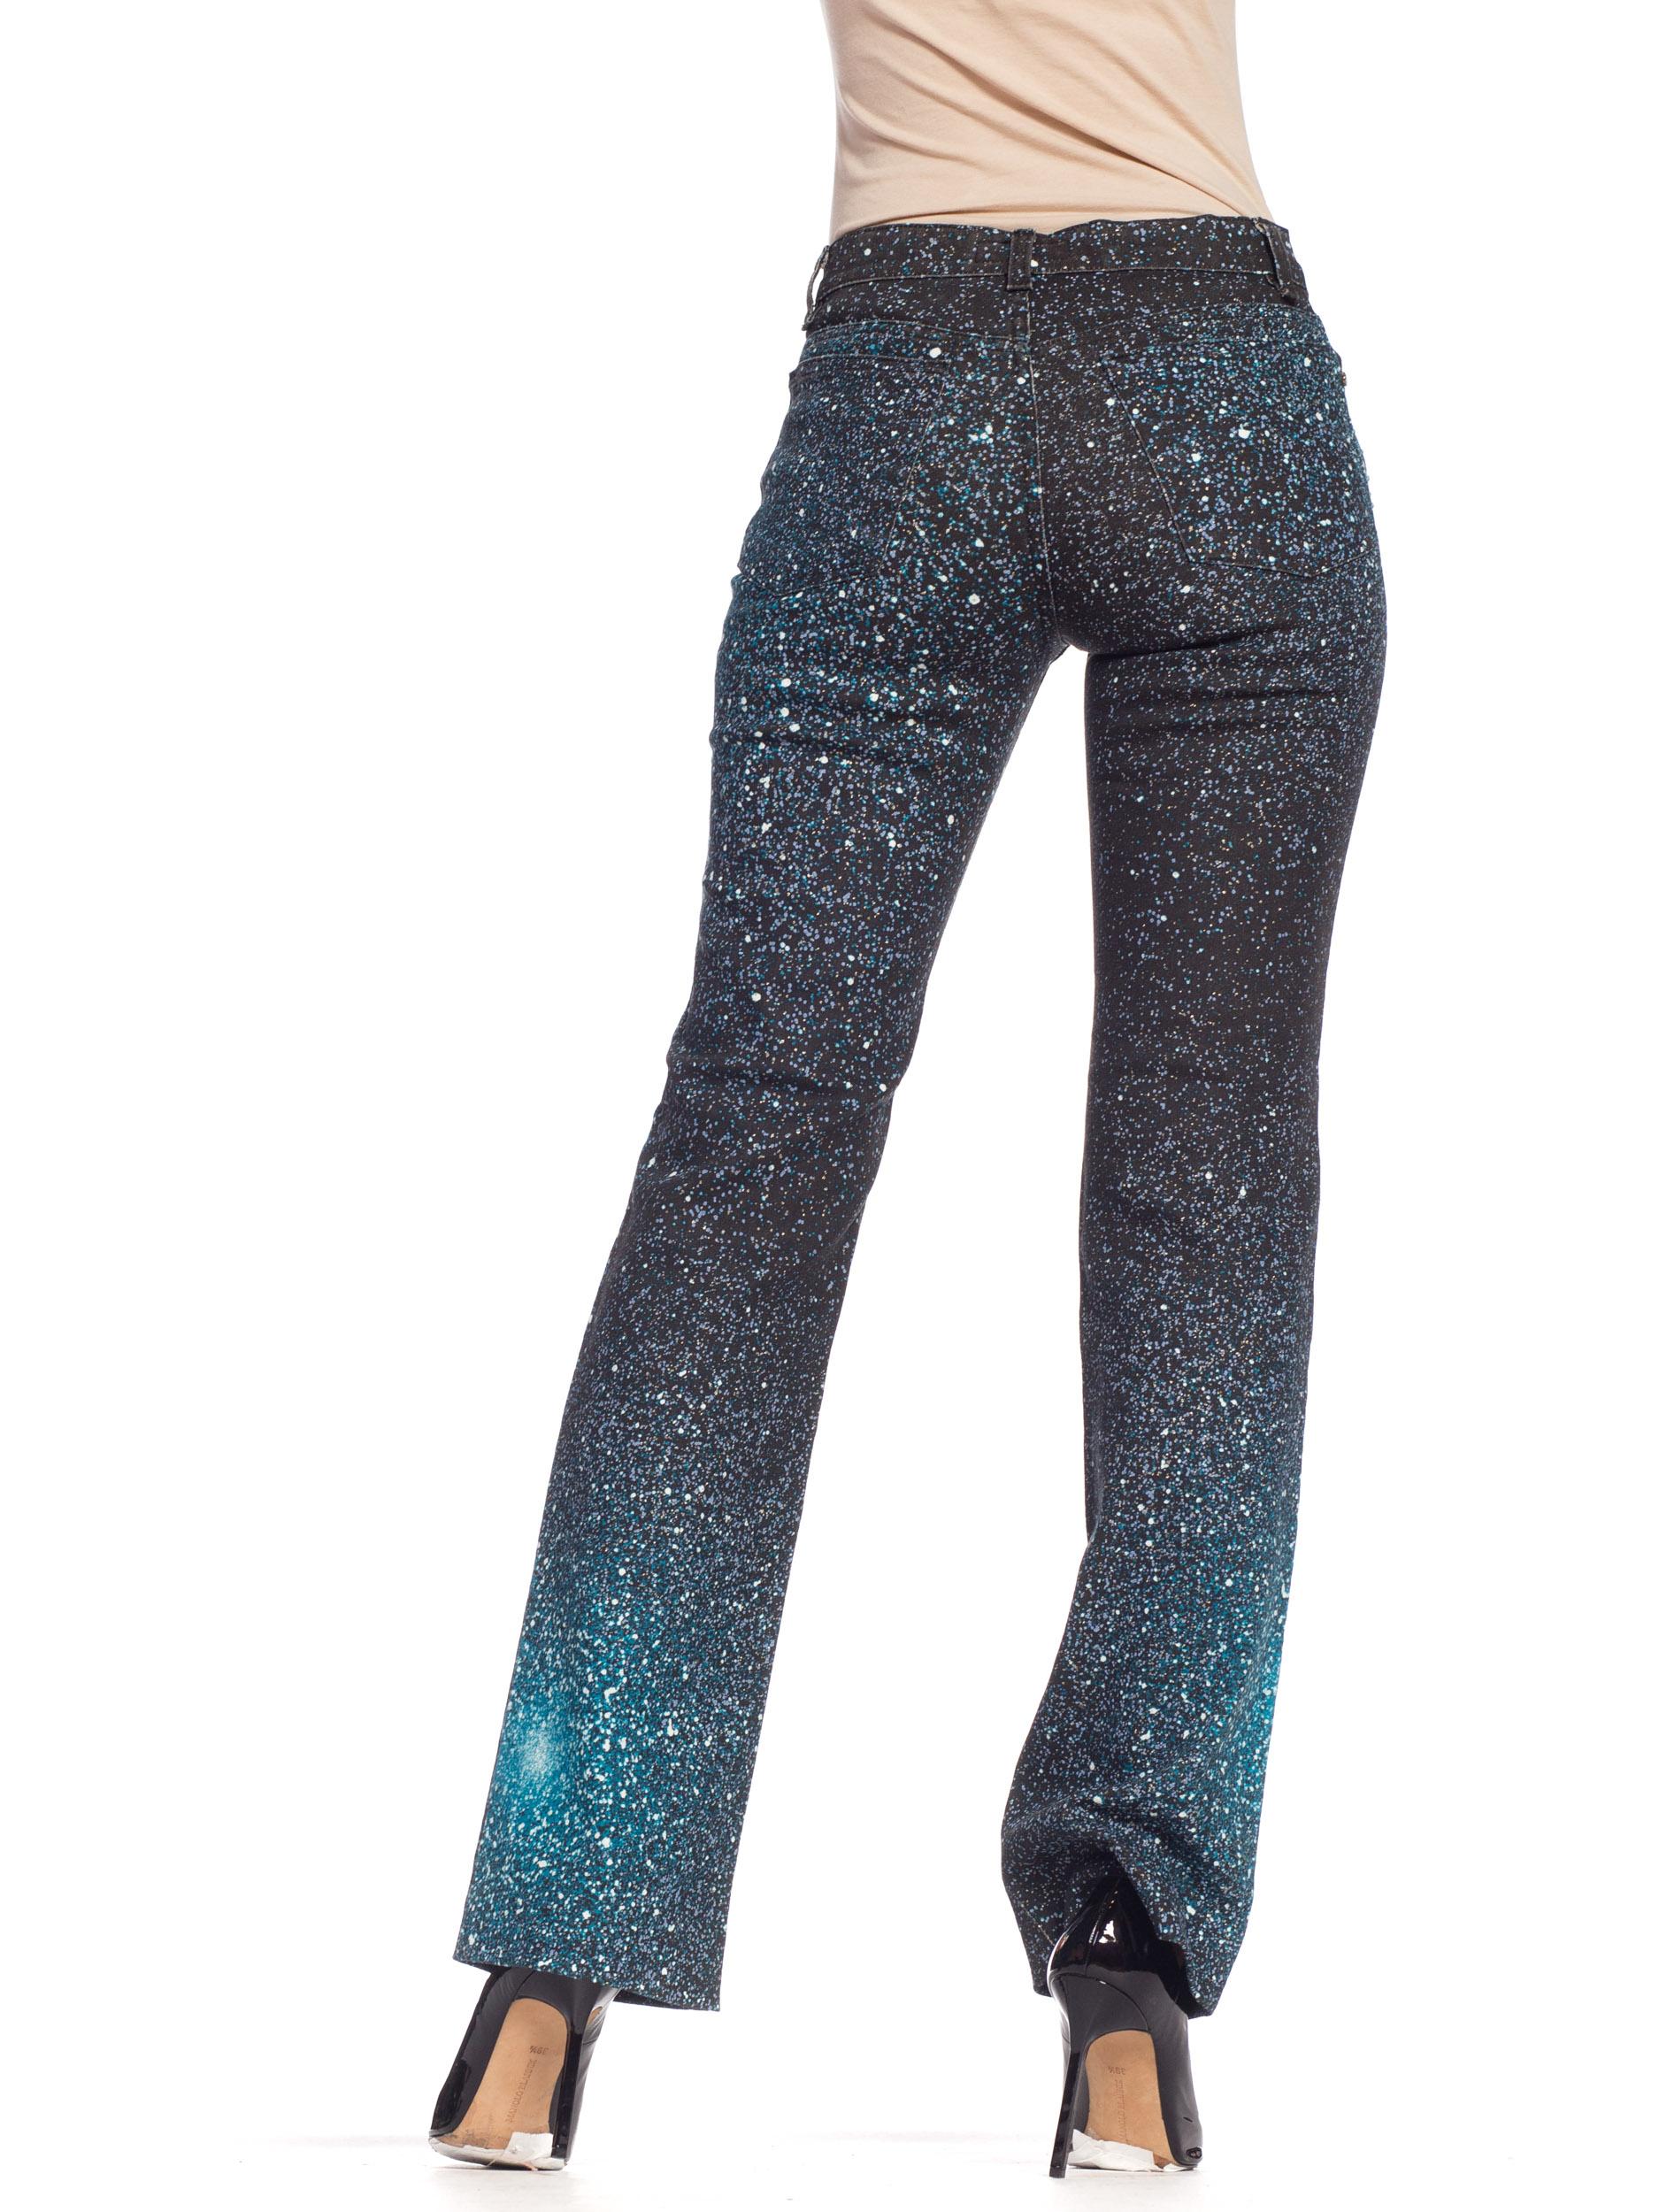 pants with crystals